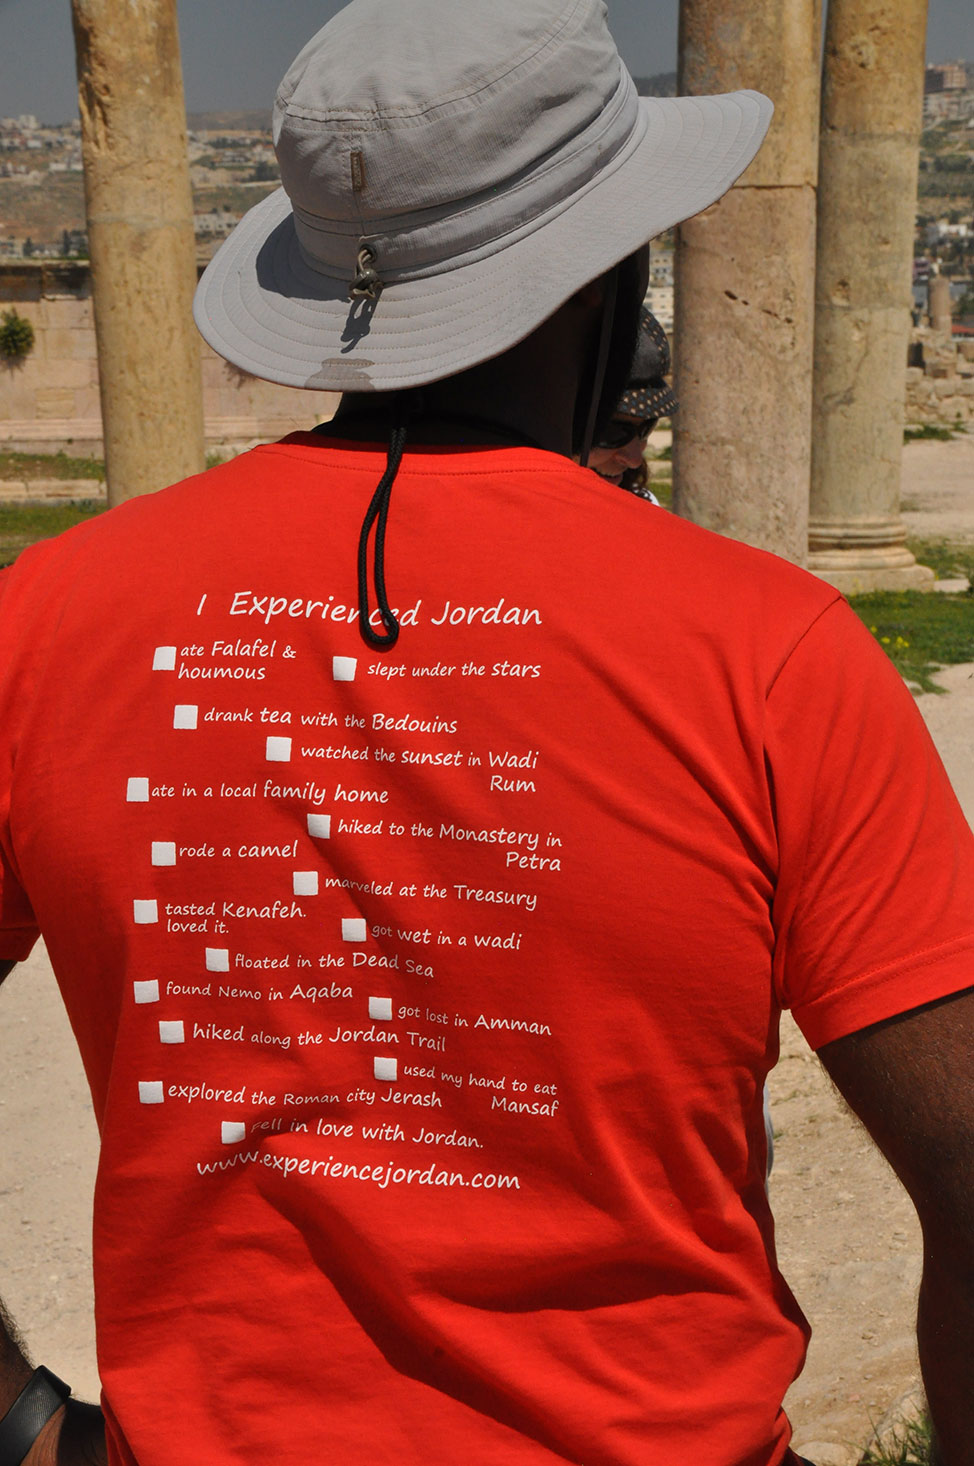 Our guide for this trip modeling his Jordan checklist.